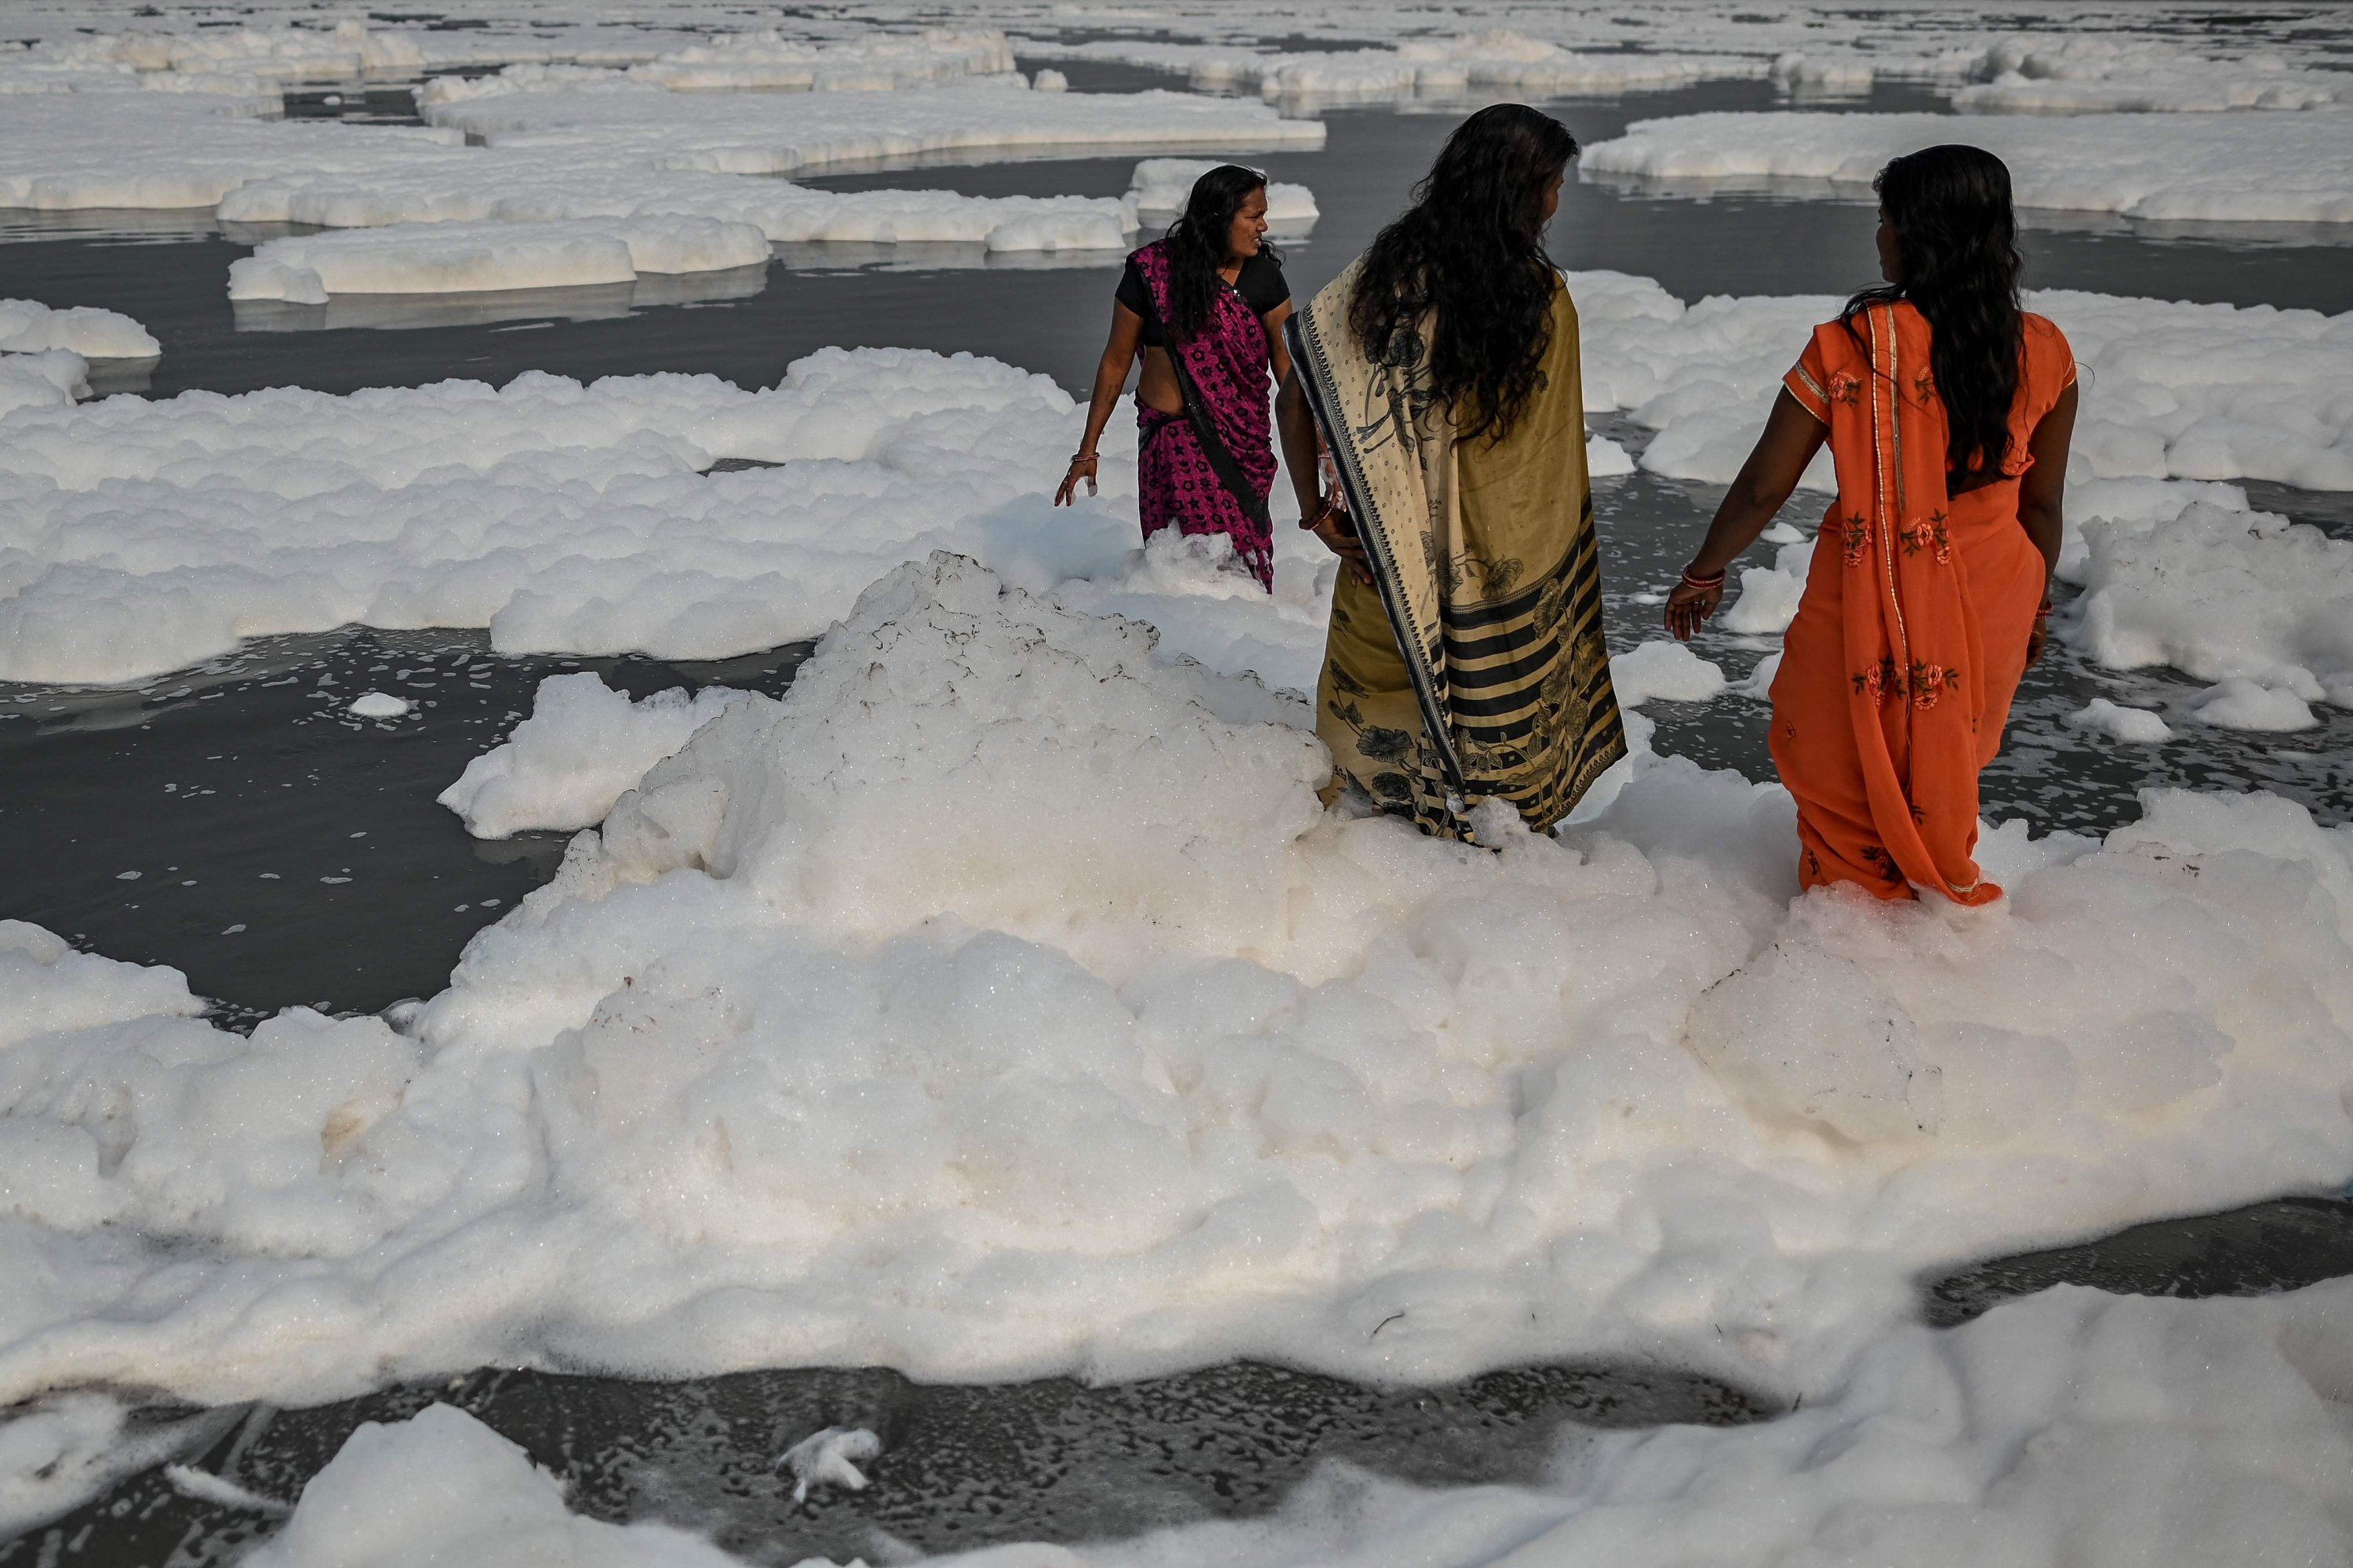 Women devotees take a dip in the waters of Yamuna river as a part of rituals for the upcoming Hindu festival of Chhat Puja amid foam created by pollution in the water in New Delhi on Nov. 8, 2021. (AFP Photo)